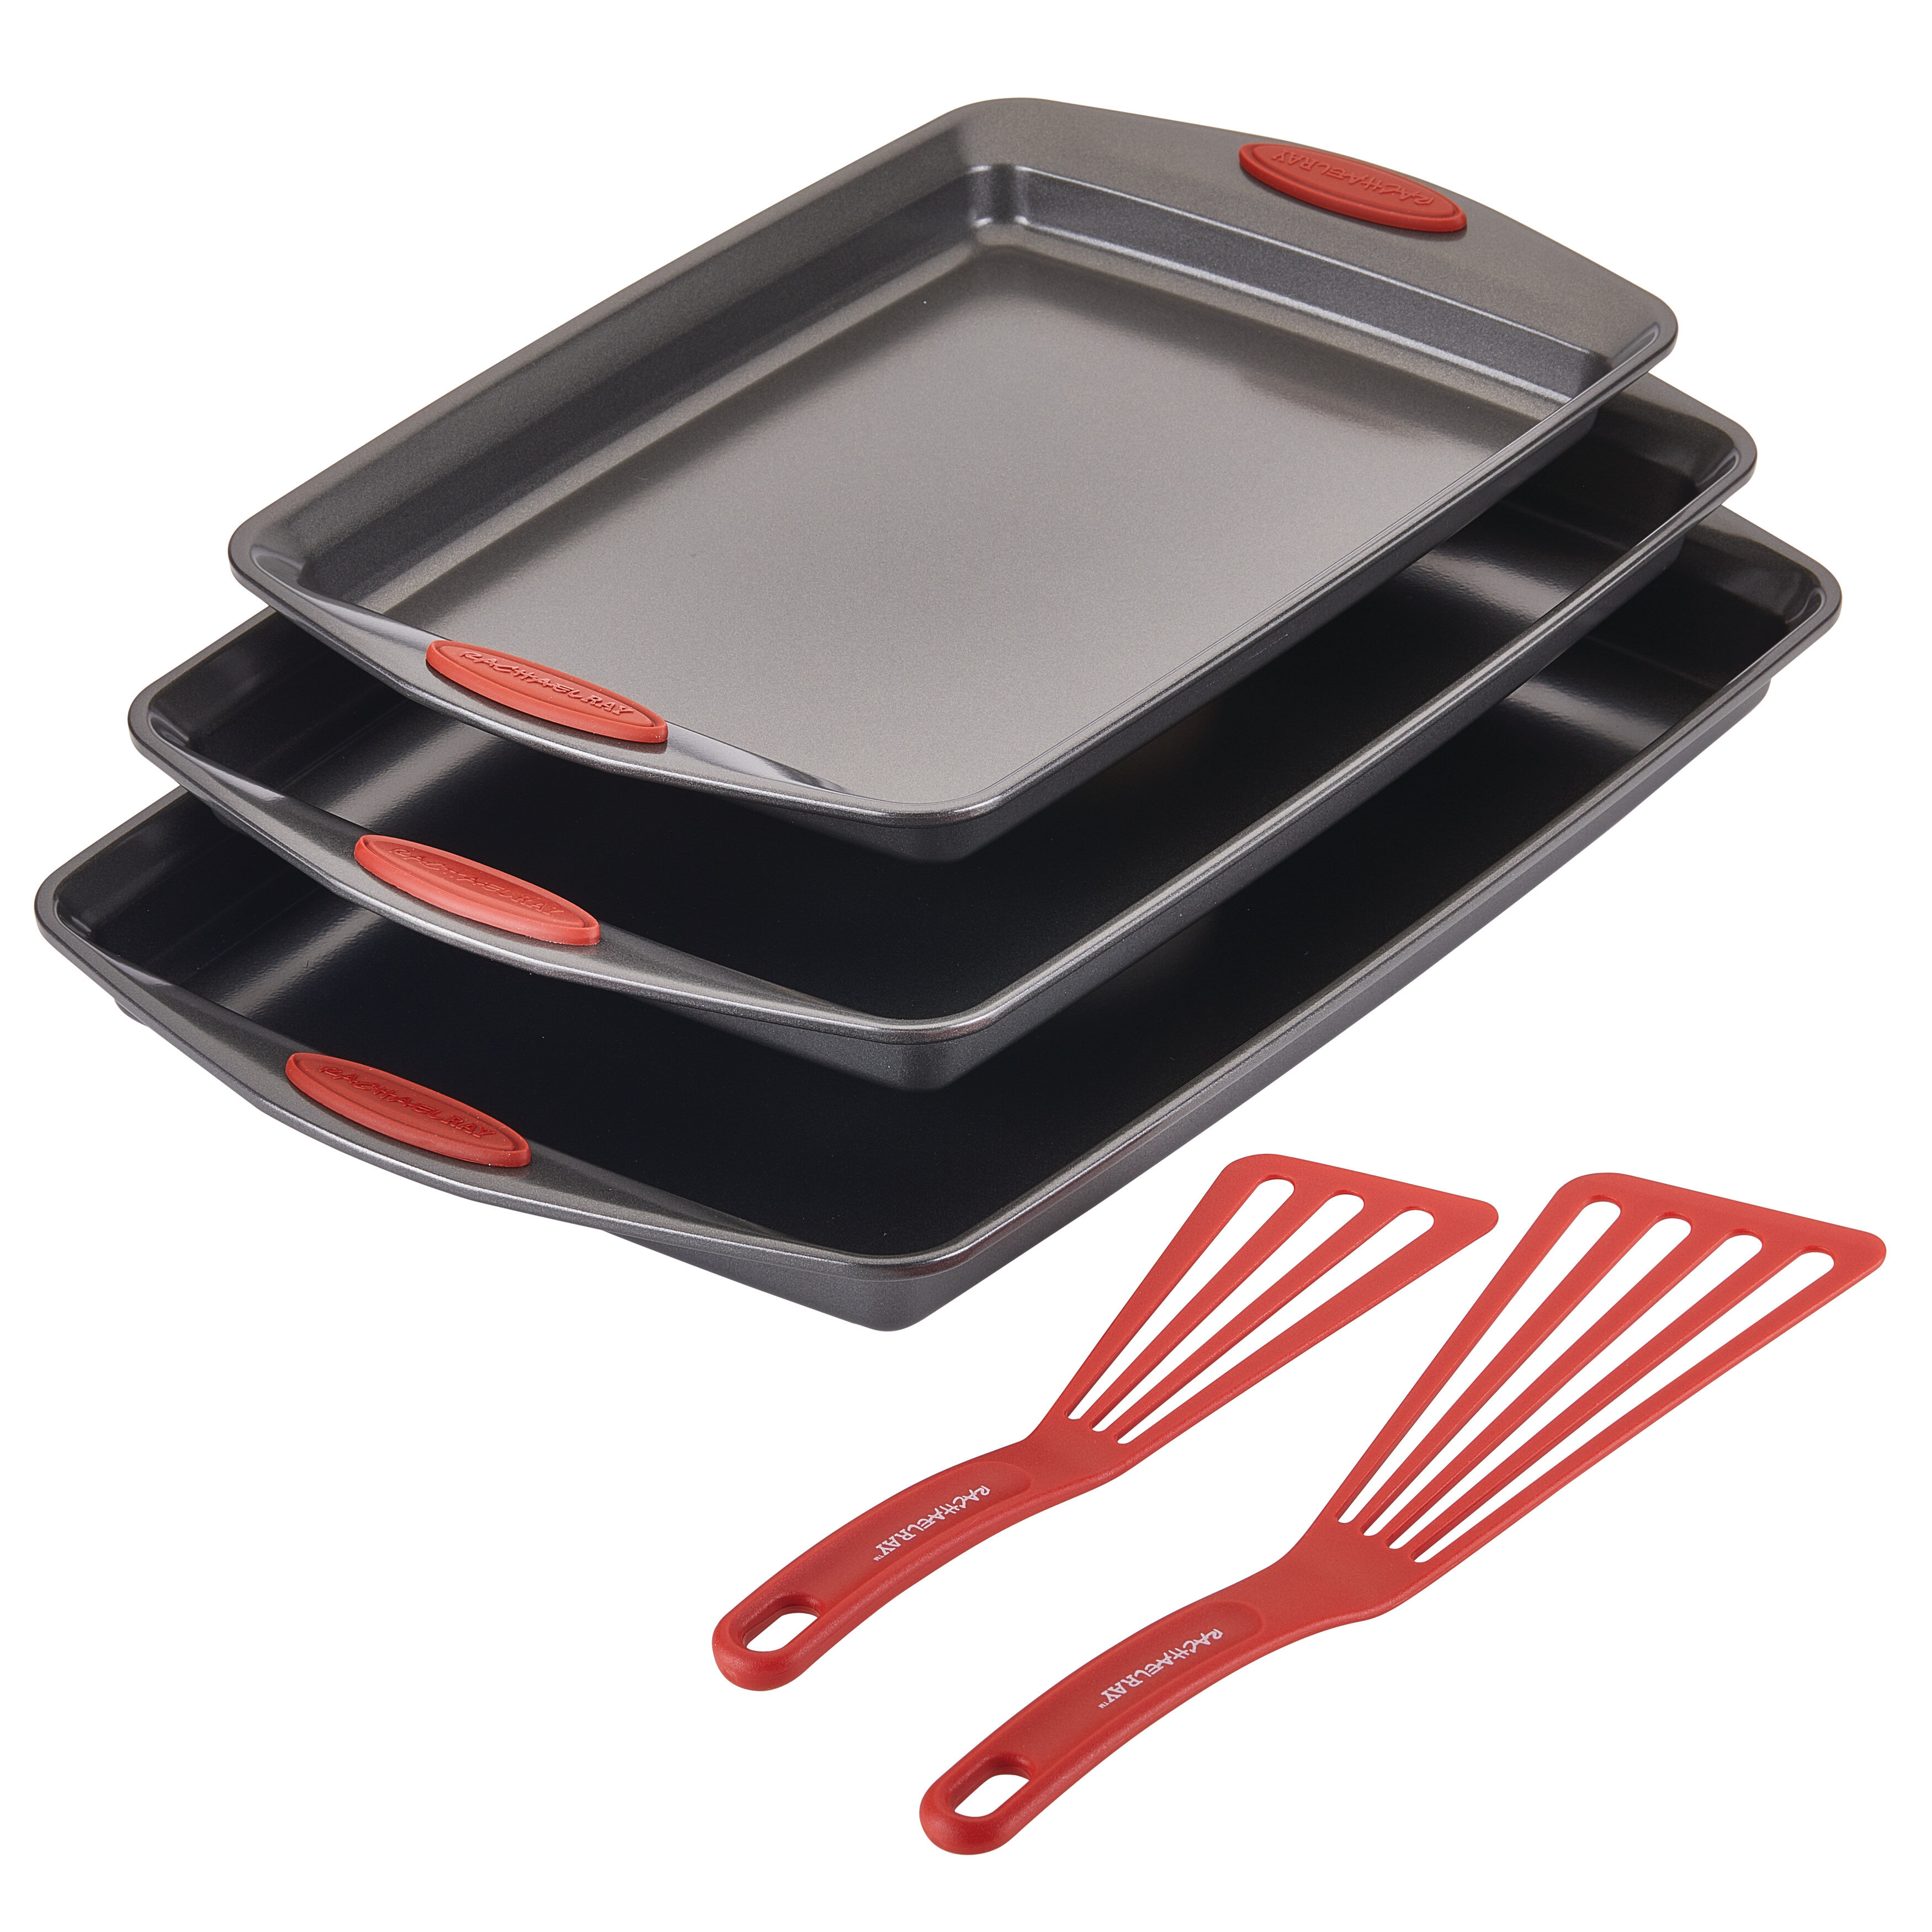 Rachael Ray 10 Piece Nonstick Bakeware Set with Handle Grips - Latte Brown  with Cranberry Red